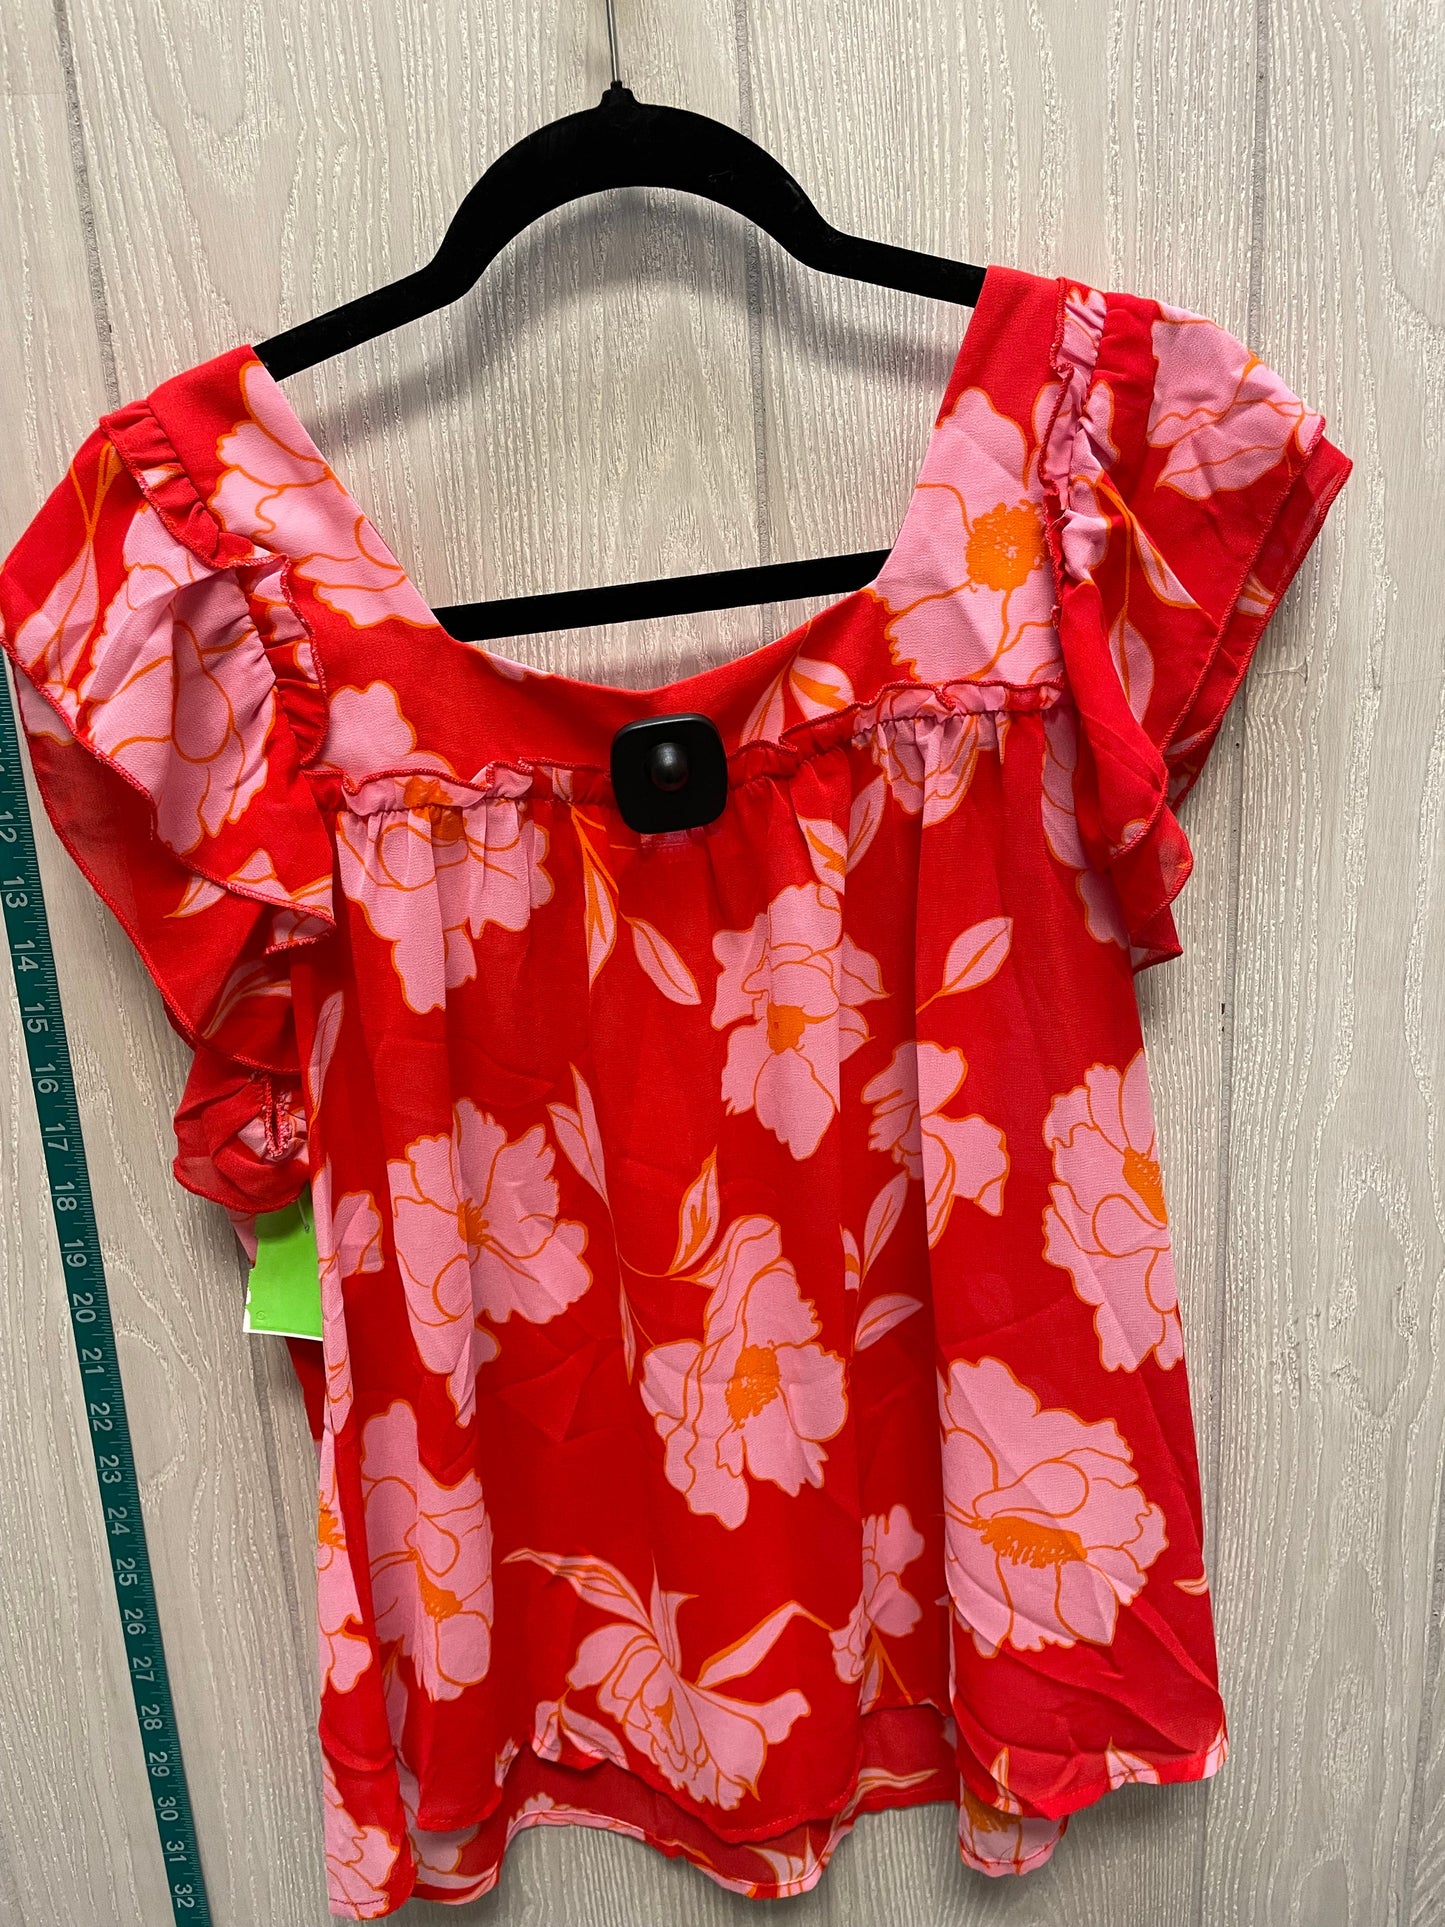 Floral Print Blouse Short Sleeve Shein, Size M